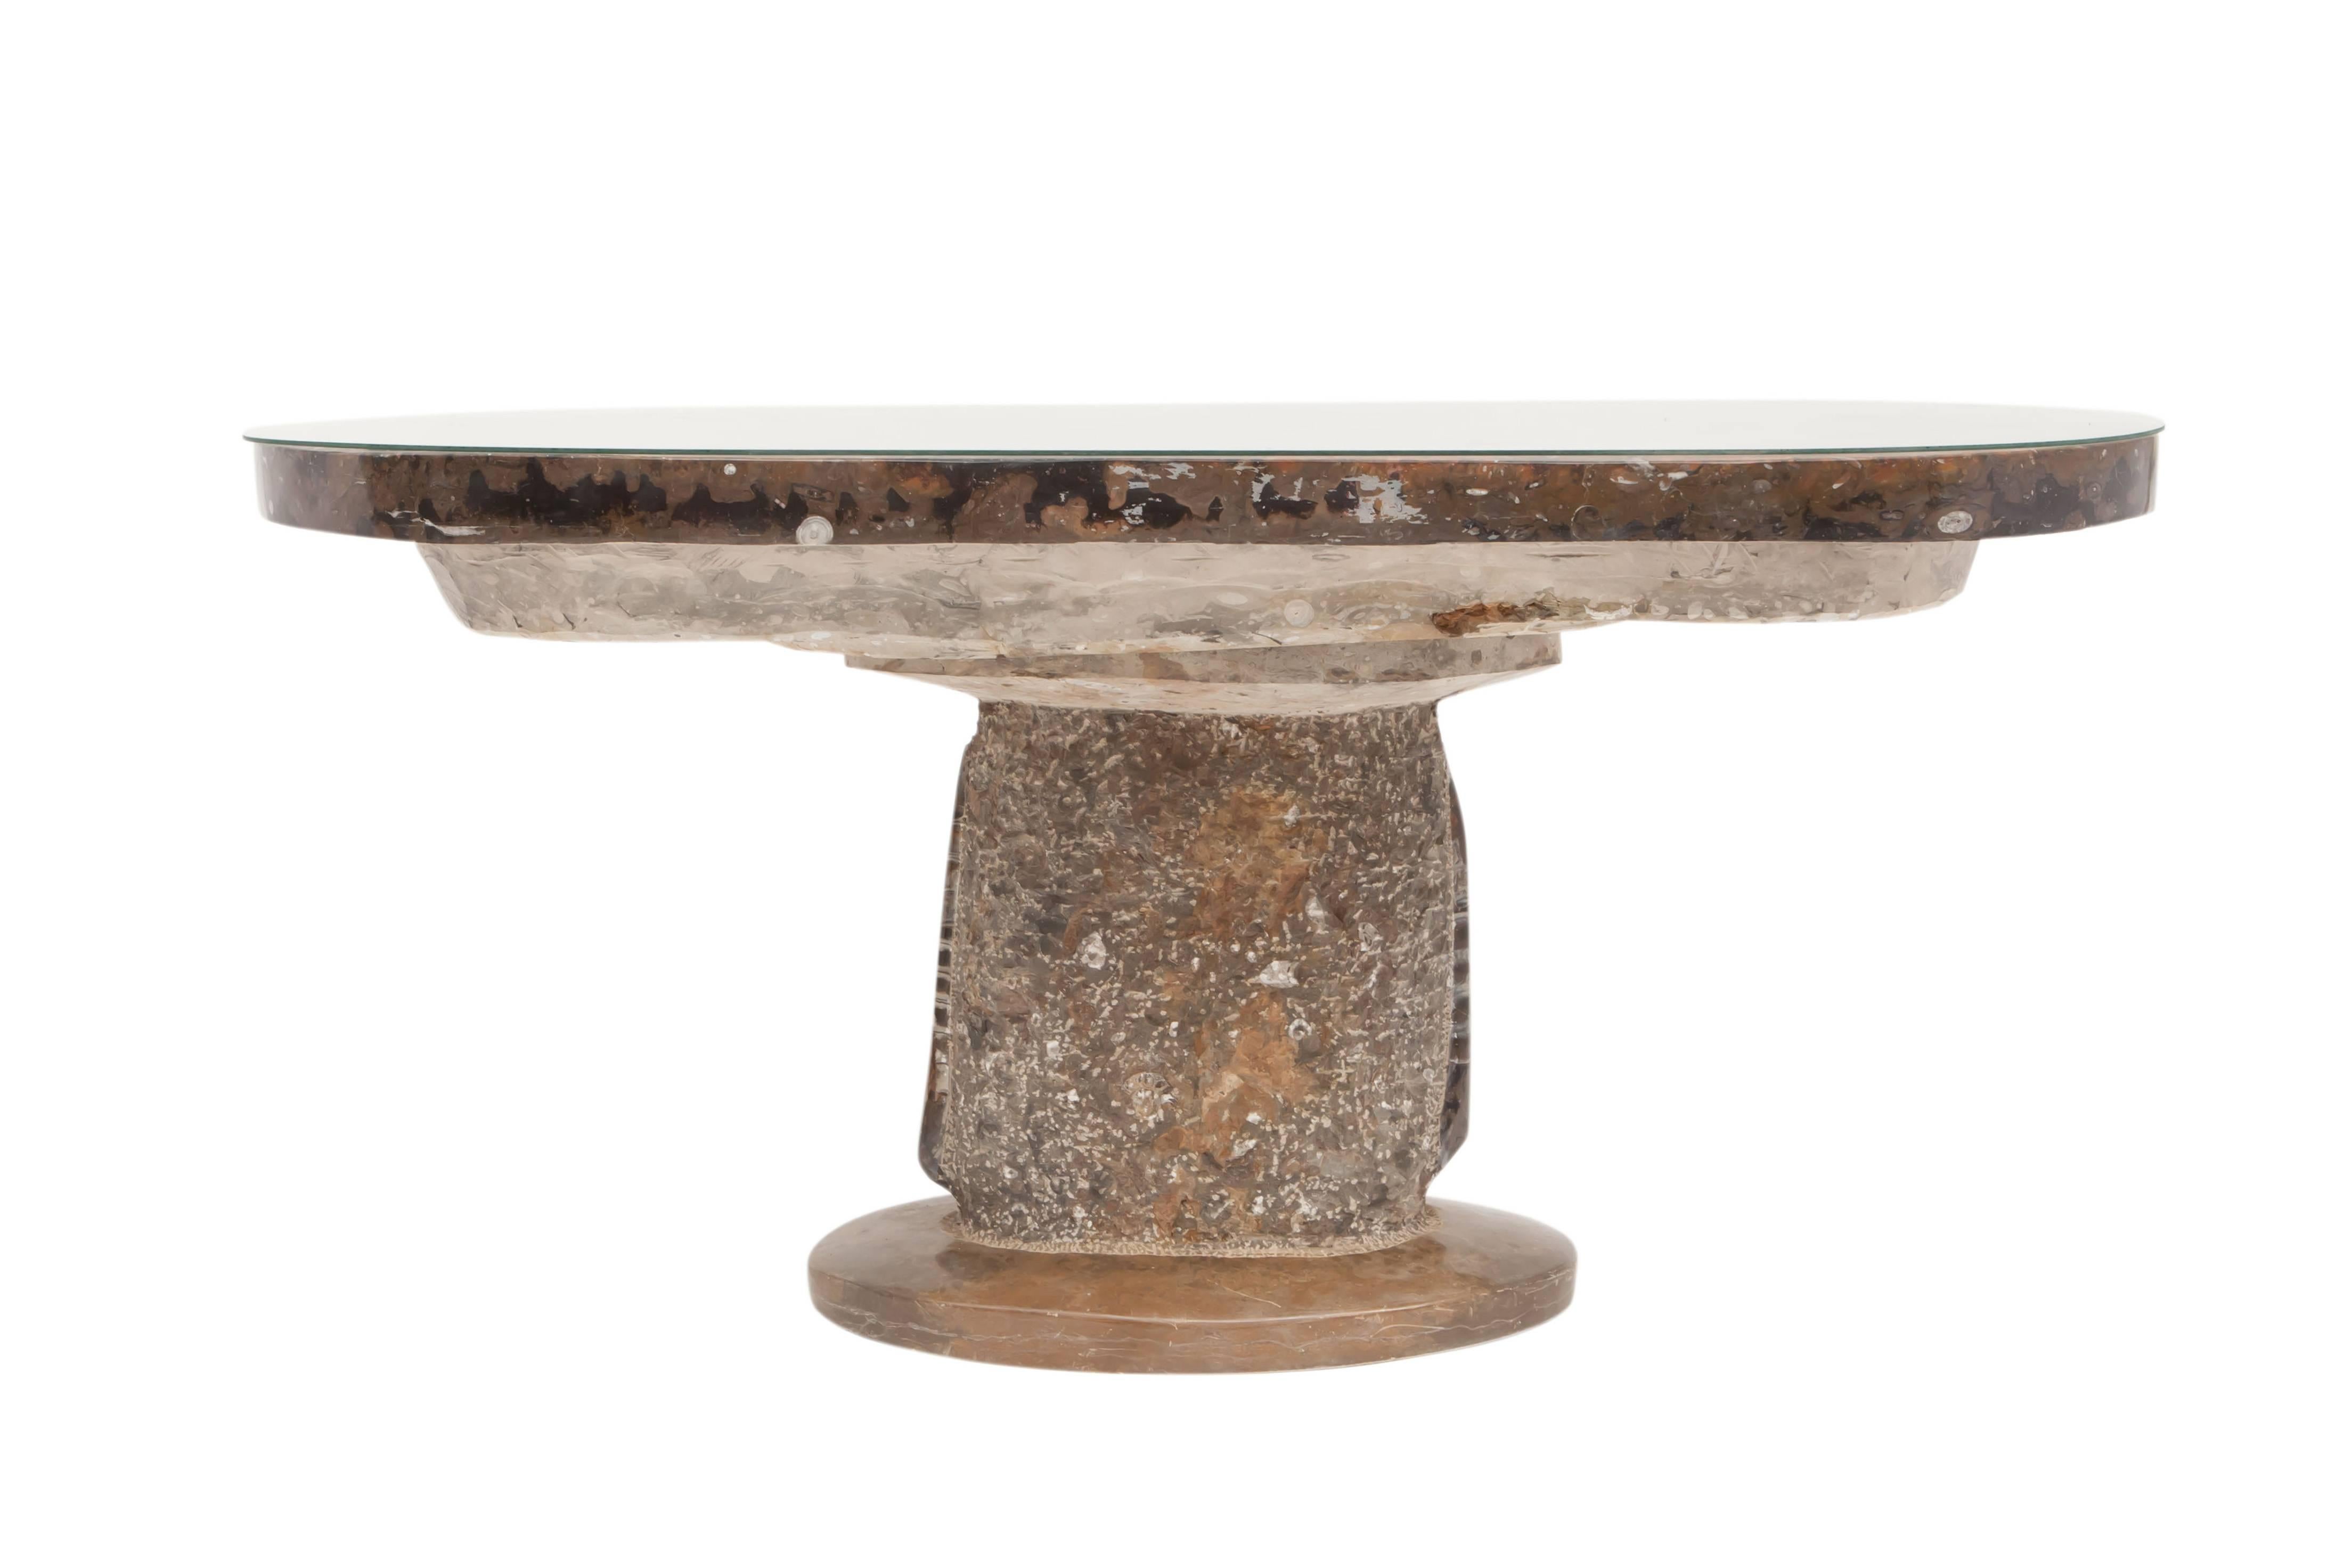 Rustic One-of-a-kind hand-carved marble coffee table with trompe l'oeil fossiles
artisanal wabi sabi atmosphere
19th century, Italy.
Measure: H 64 cm x D 75 cm x W 140 cm.
this piece would fit well in a minimal primitive inspired Axel Vervoordt